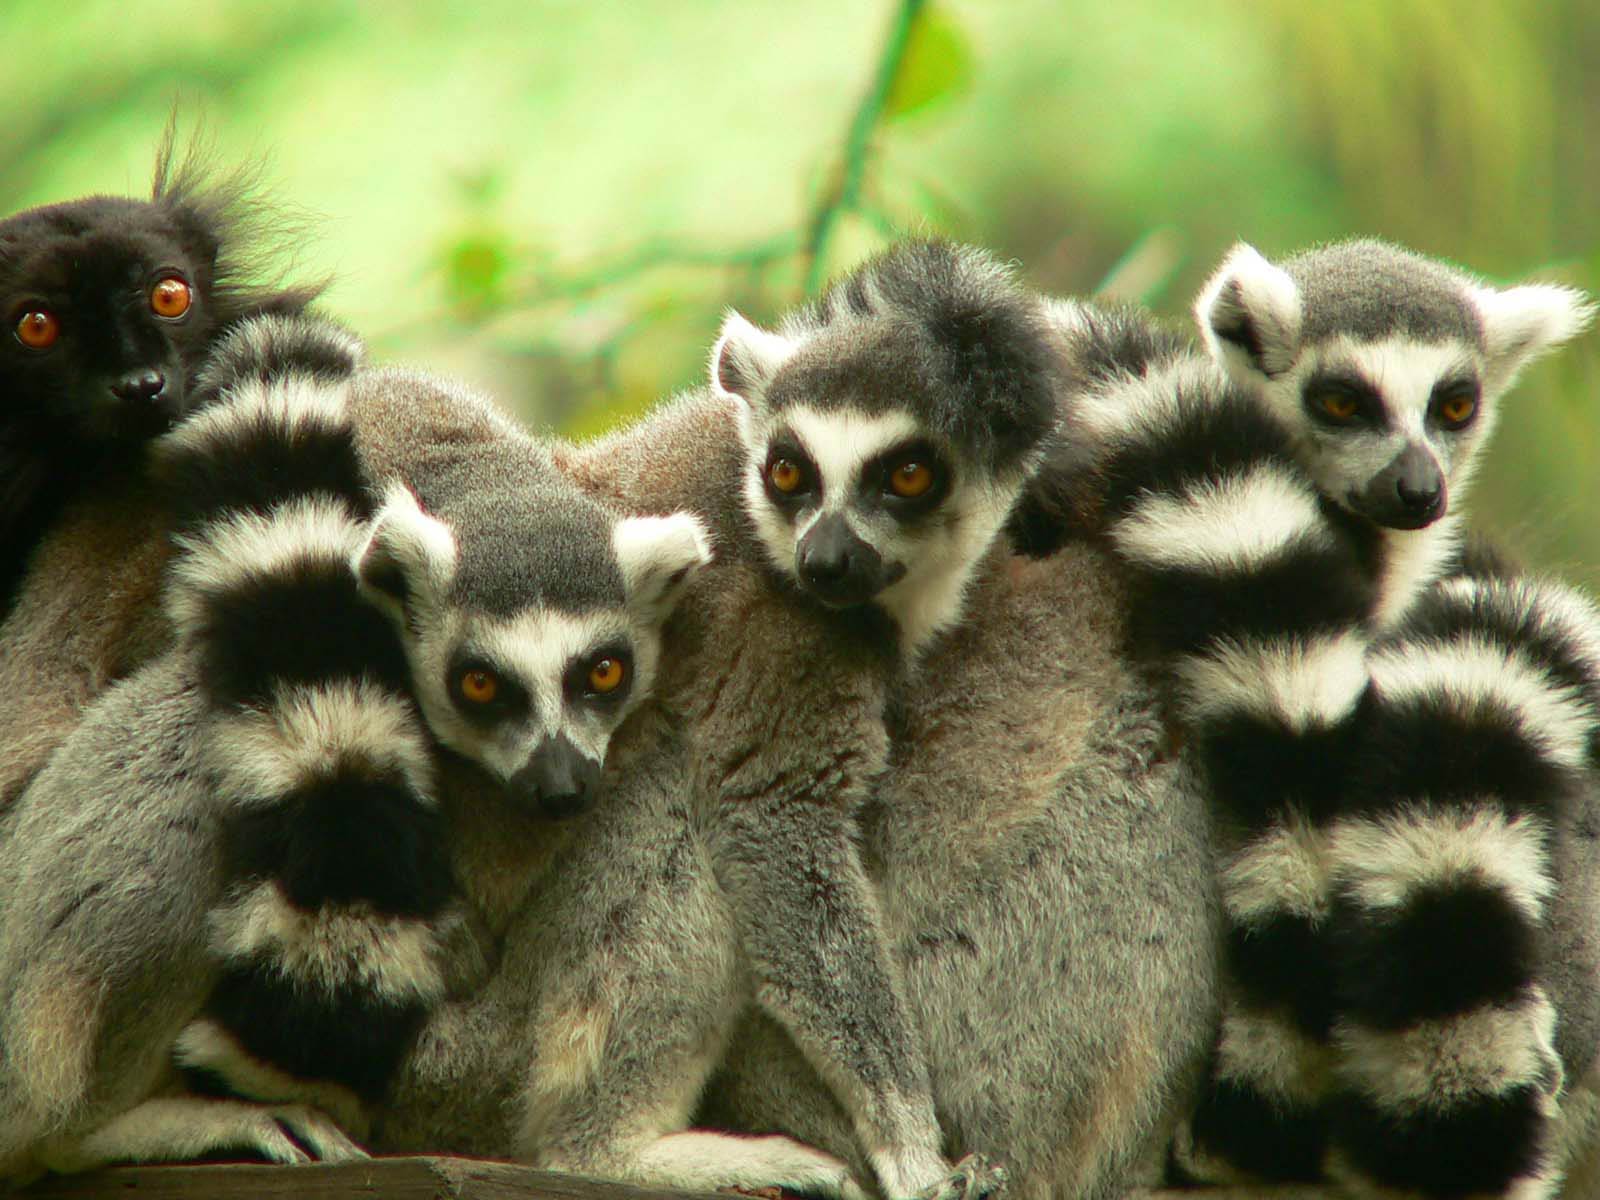 free Lemur wallpaper wallpapers and background